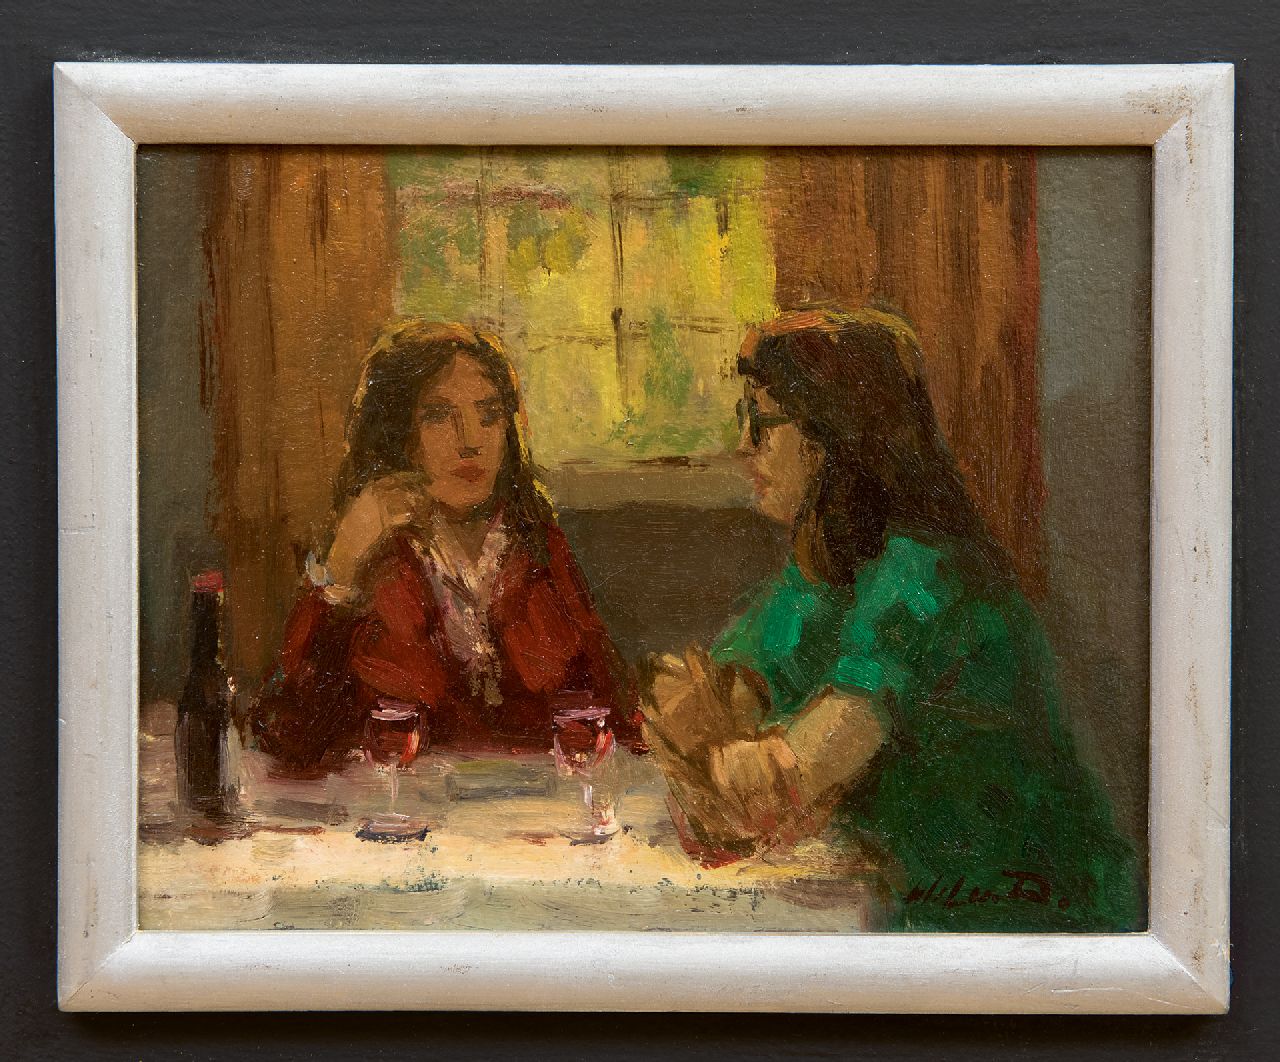 Dinther W.P.M. van | Wilhelmus Petrus Marie 'Wil' van Dinther | Paintings offered for sale | Sharing confidences, oil on board 14.9 x 18.8 cm, signed l.r. and on the reverse